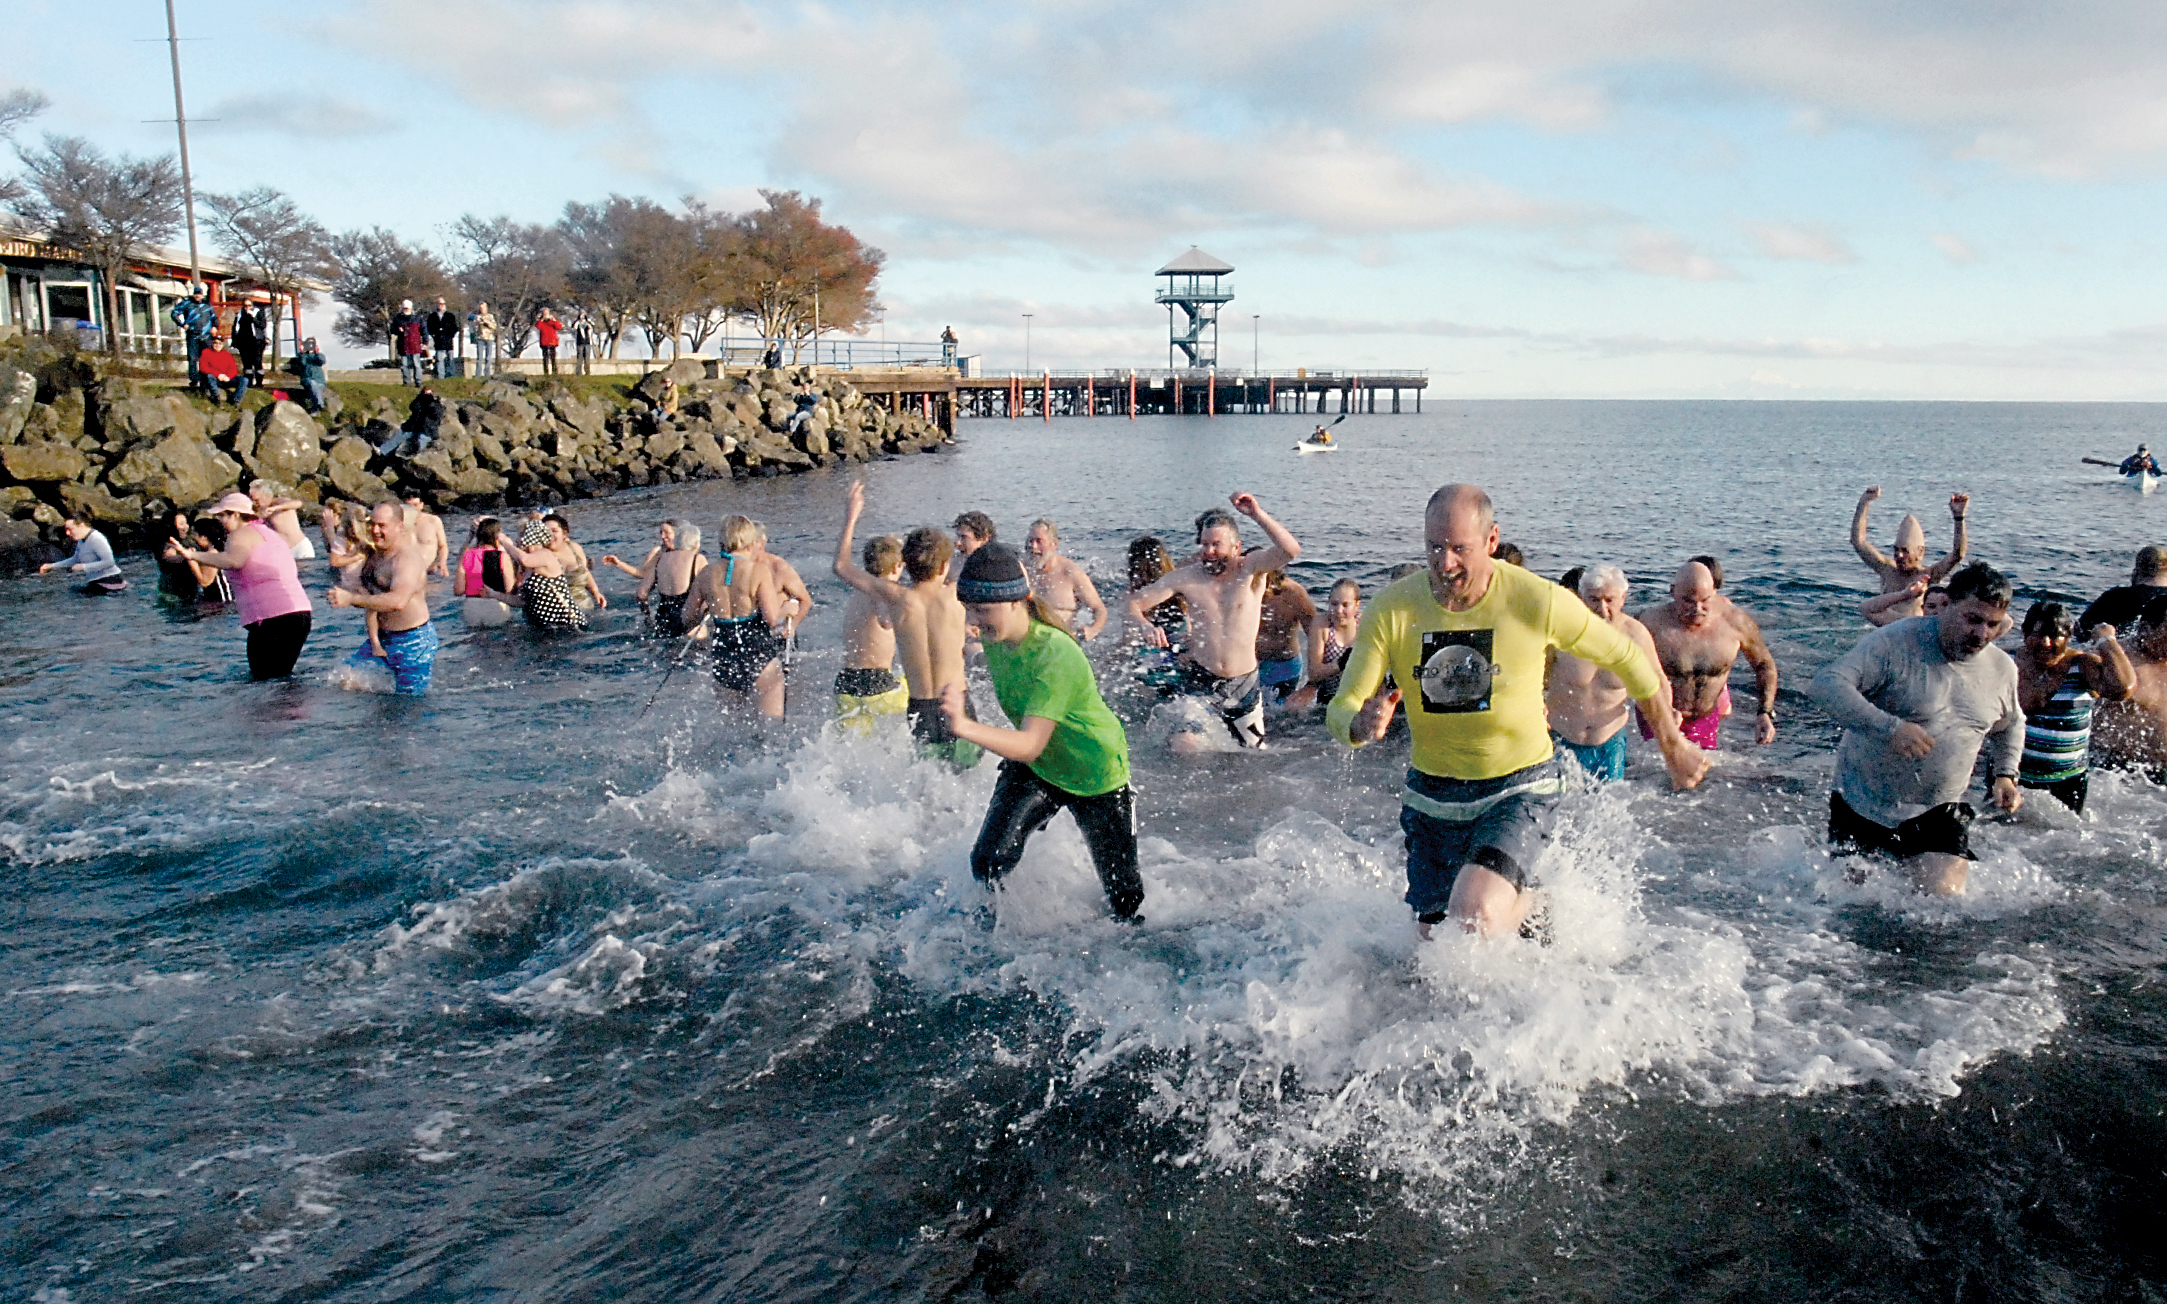 Participants in the 2016 Port Angeles Polar Bear Plunge dash in and out of the chilly water of Port Angeles Harbor at Hollywood Beach on New Year's Day. (Keith Thorpe/Peninsula Daily News)